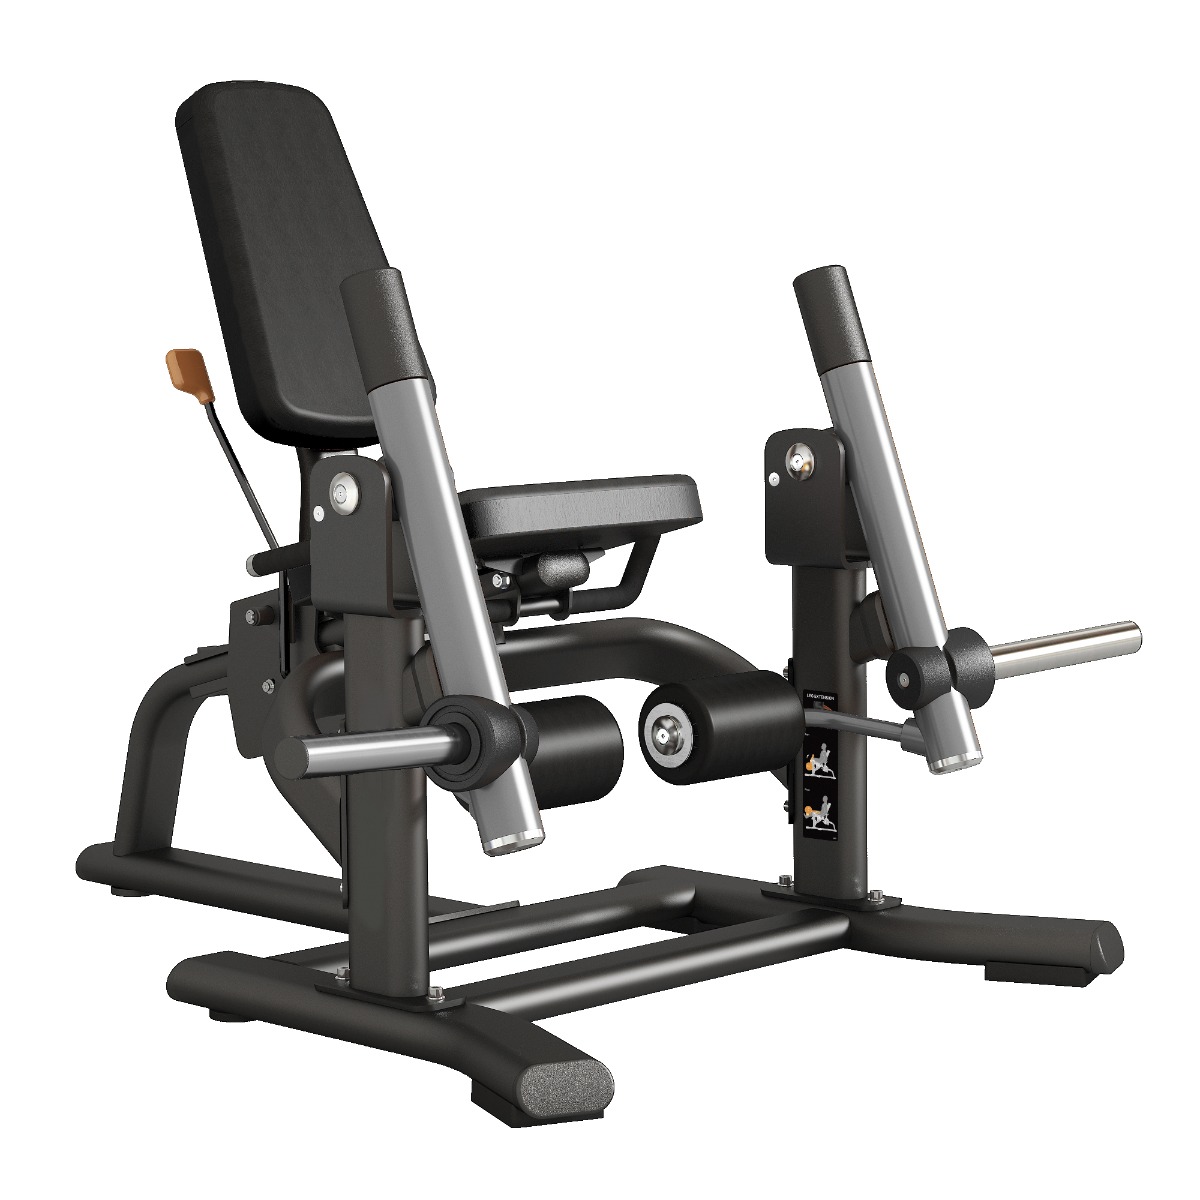 Toorx Absolute Line Leg Extension - FWX 9400